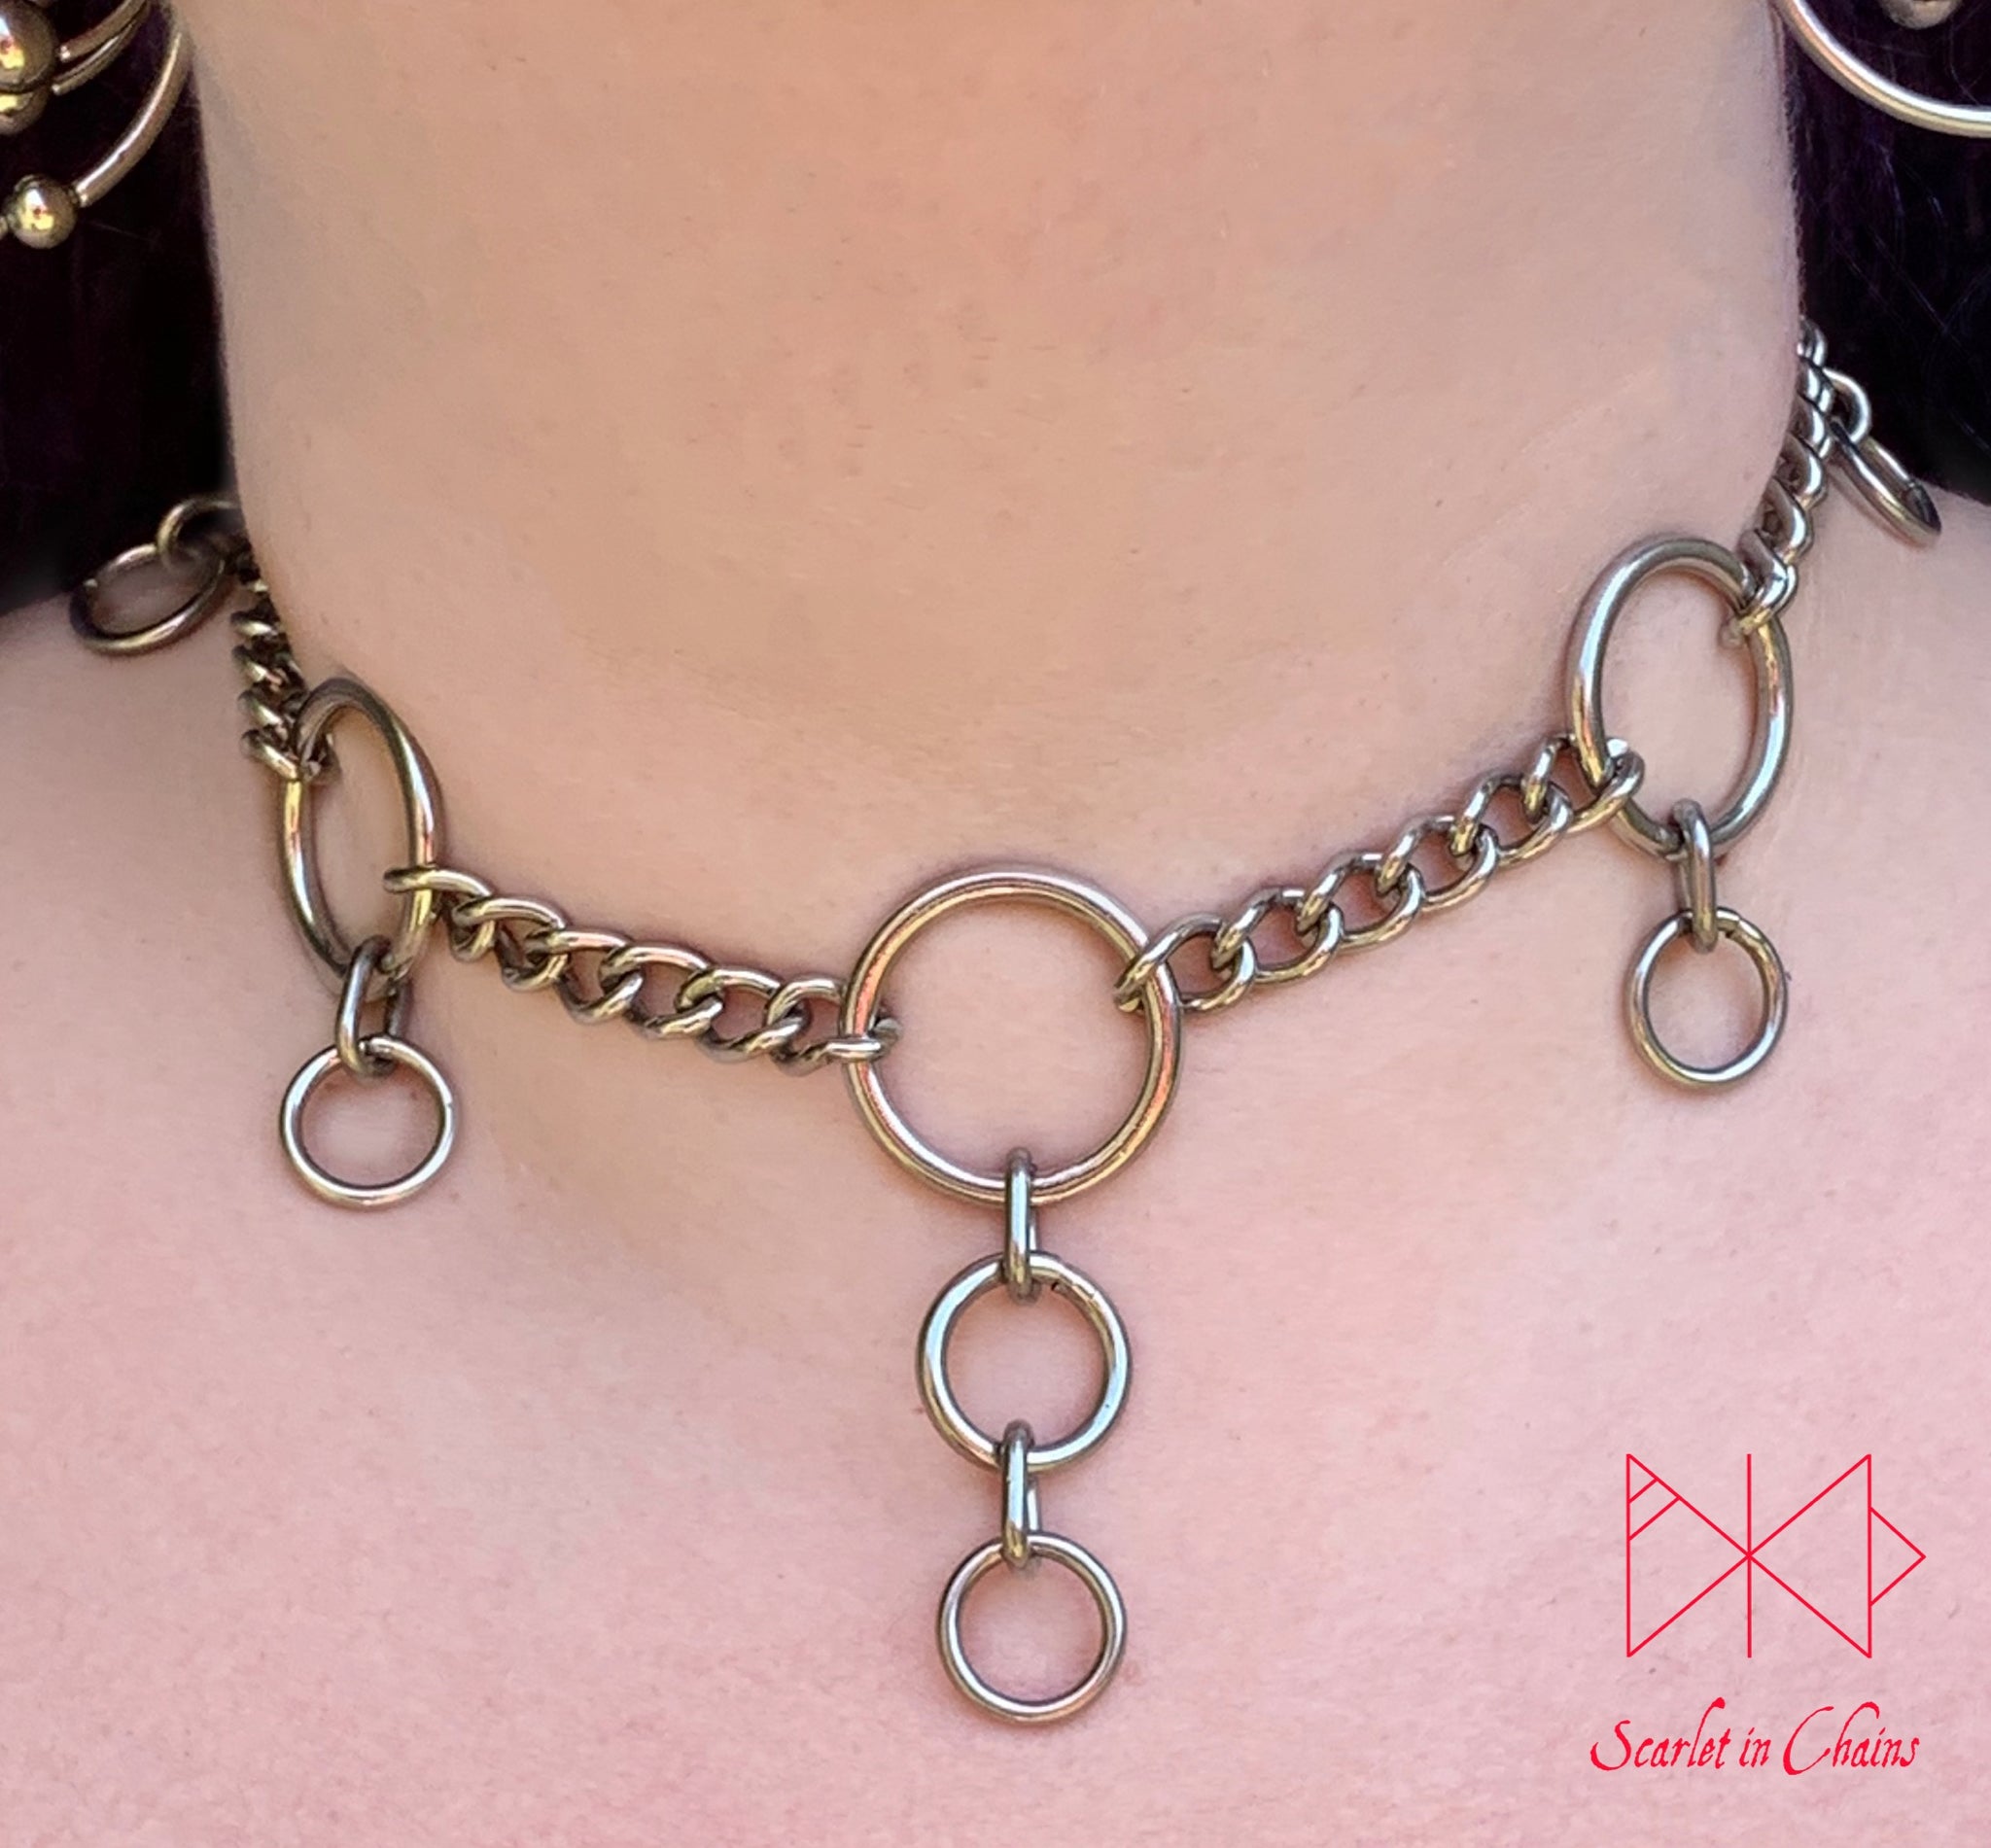 Coven mini collar worn, Stainless steel mini chain choker with 5 o rings spaced around the collar with a smaller o ring hanging from the side ones and 2 smaller o rings hanging from the central one with new links